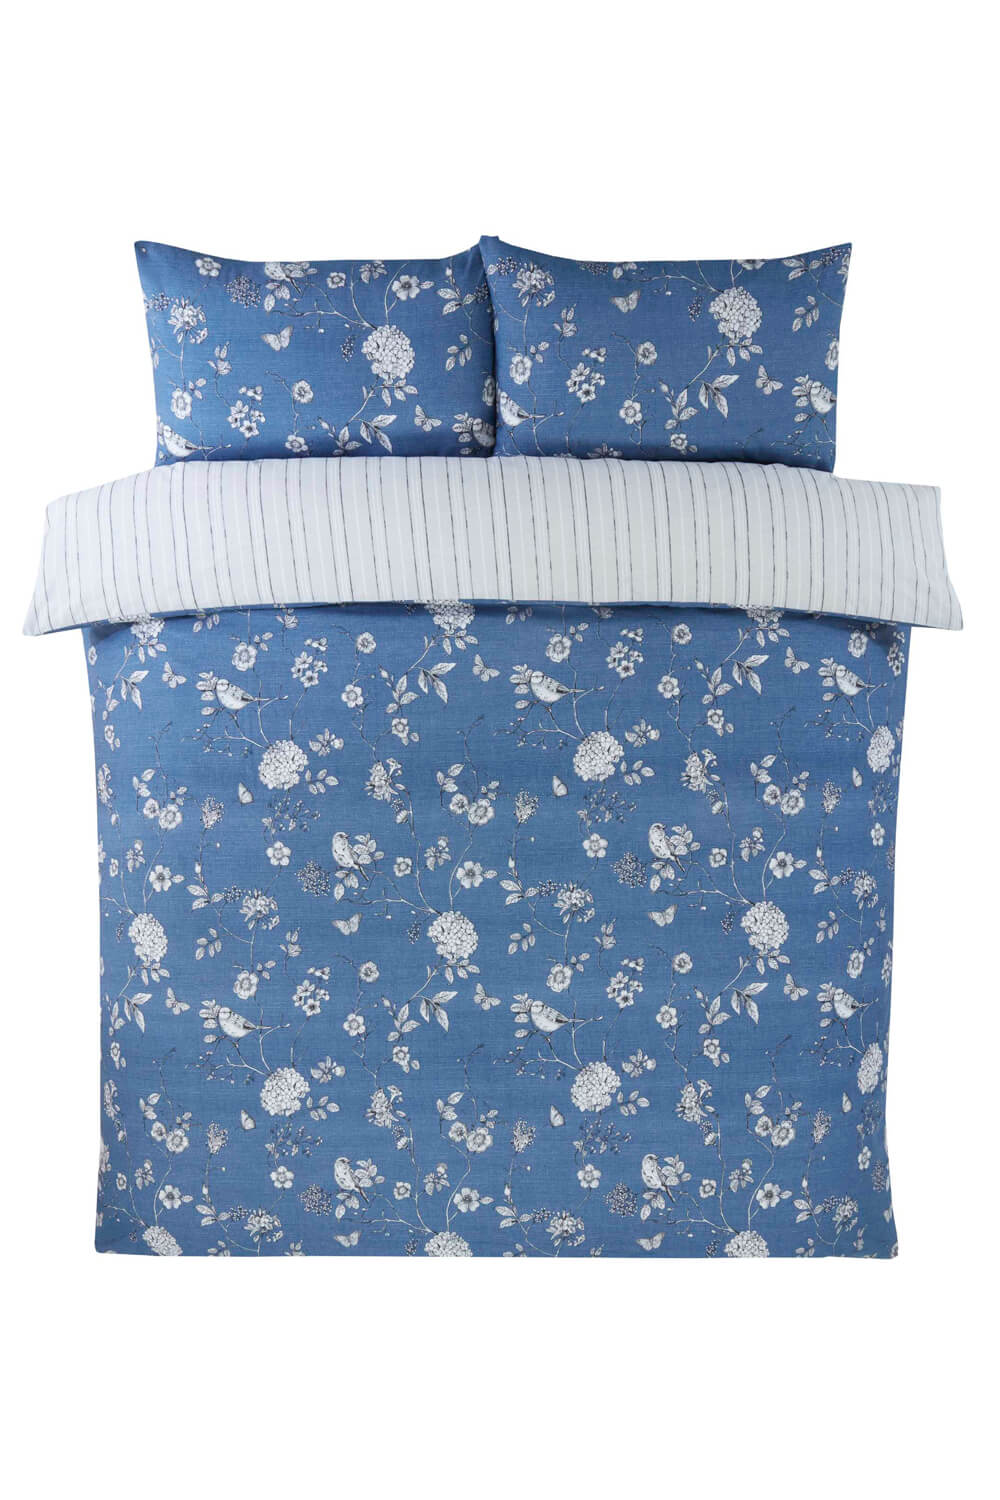 Blue Double Country Toile Floral Duvet Set, Image 3 of 3